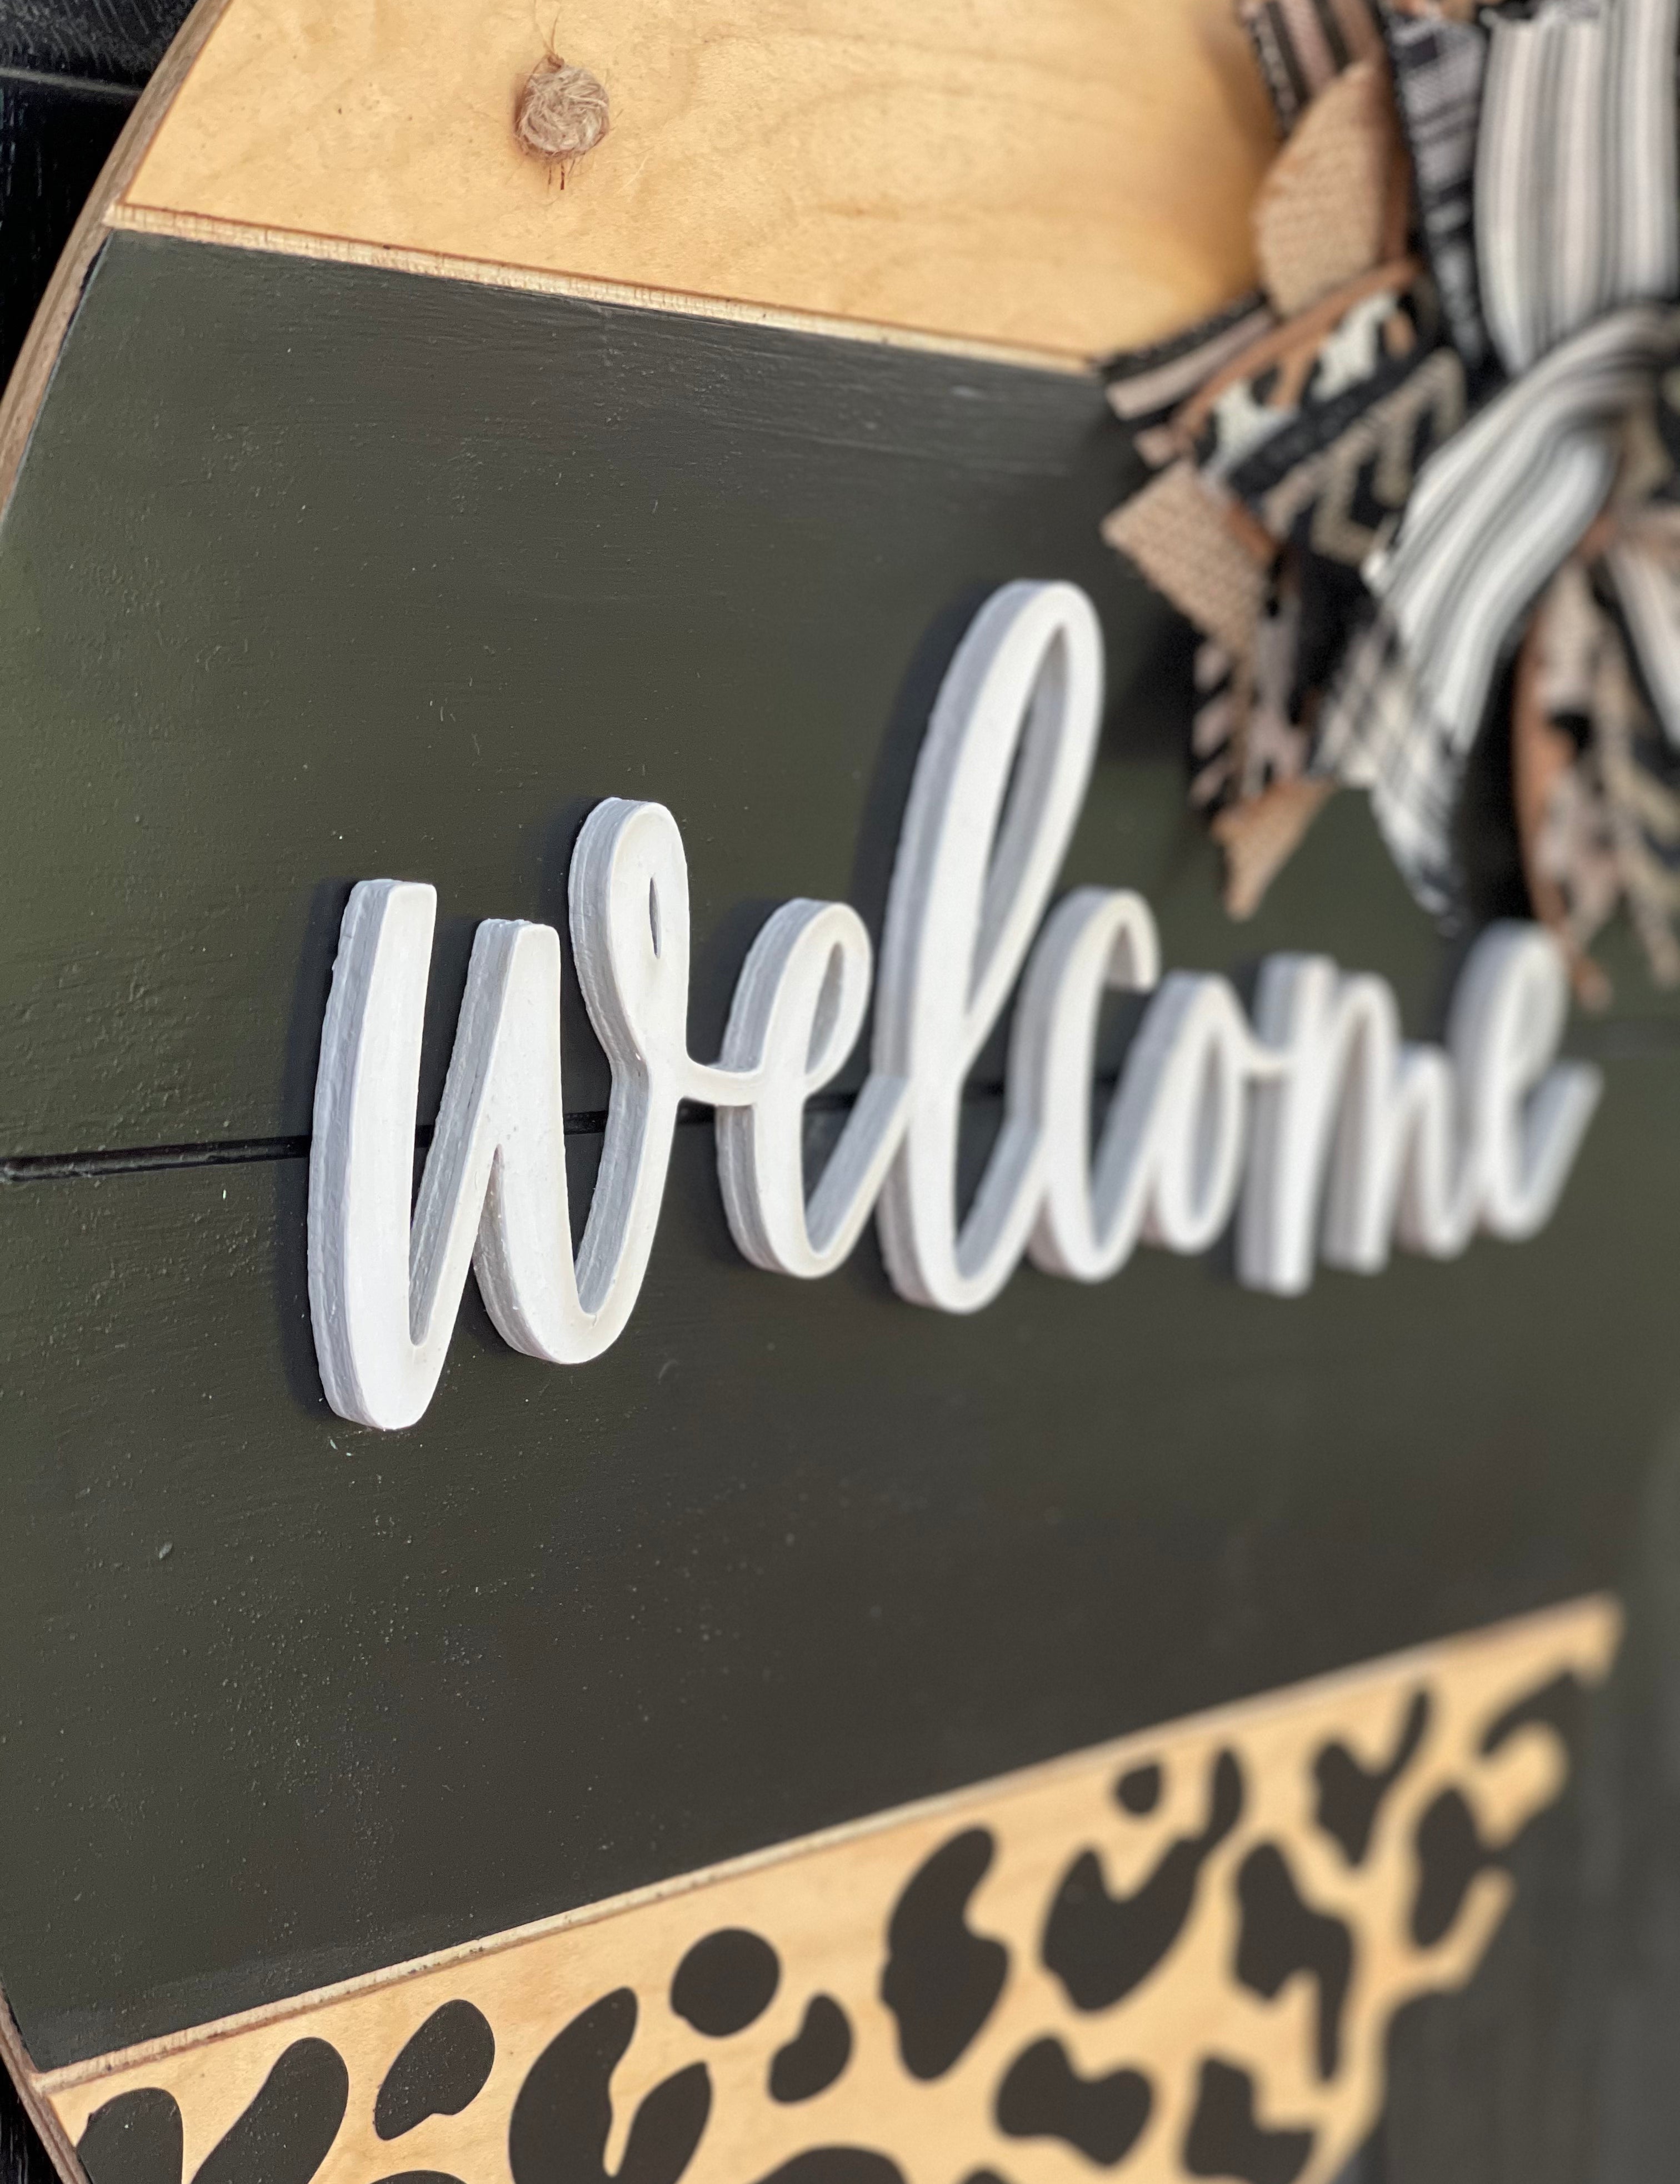 This image show a close up of the 3D welcome cutout.